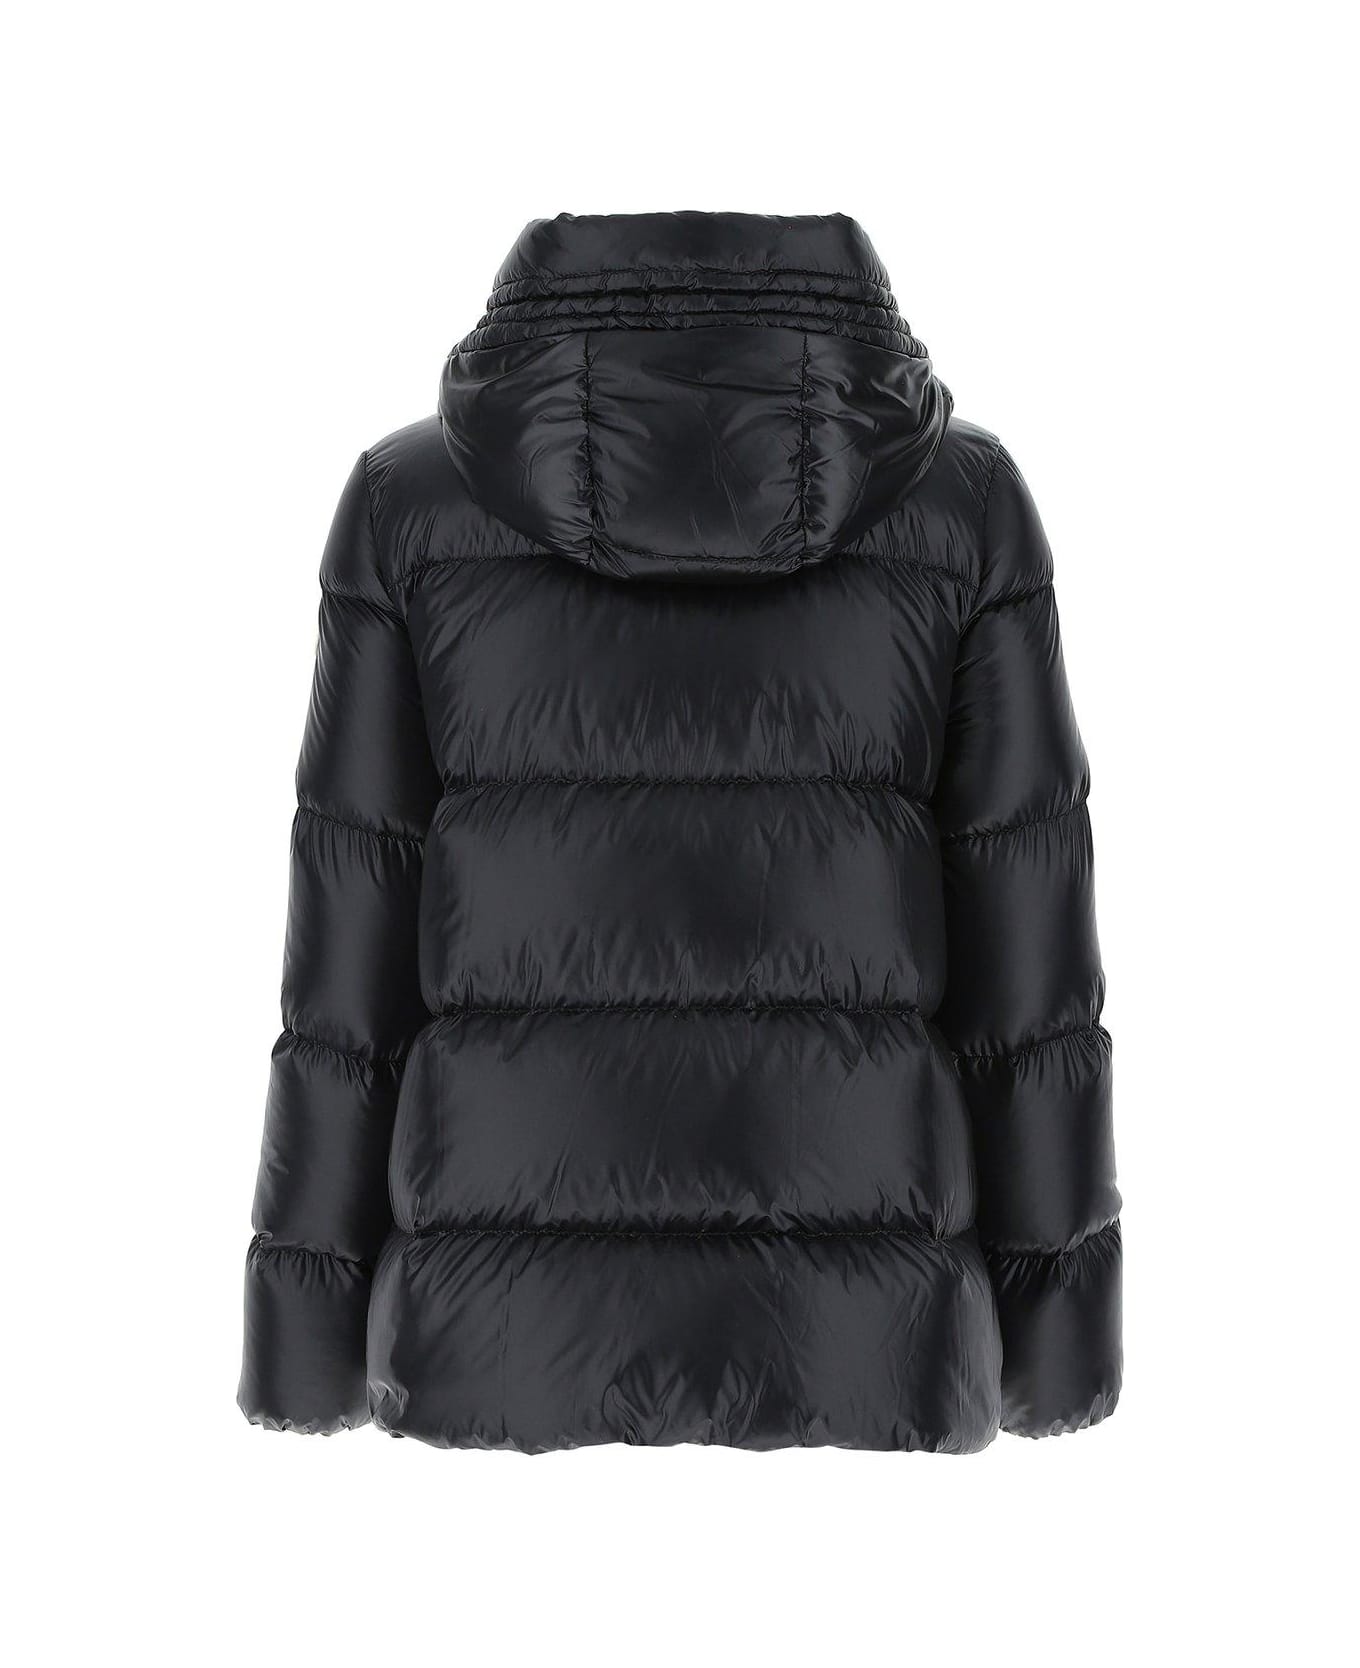 Moncler Hooded Padded Down Jacket | italist